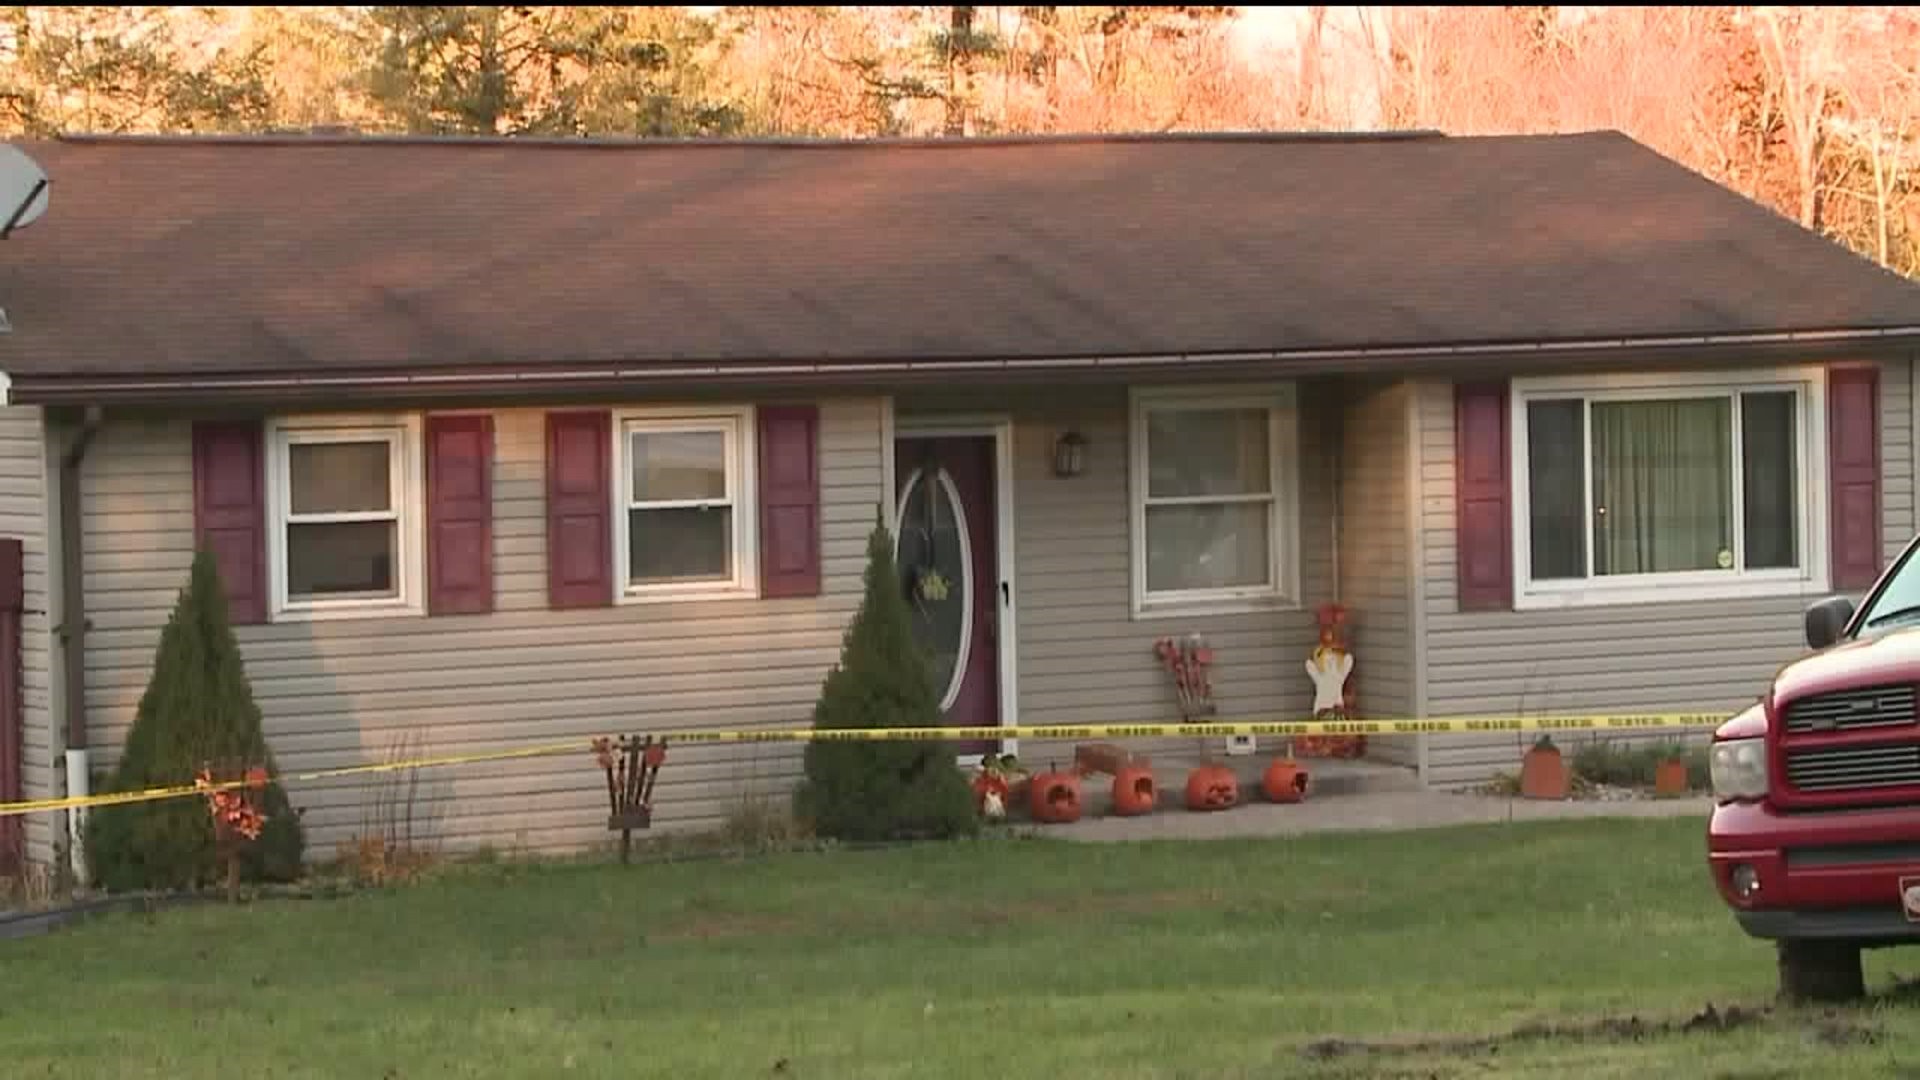 Death of Baby Possible Case of Homicide